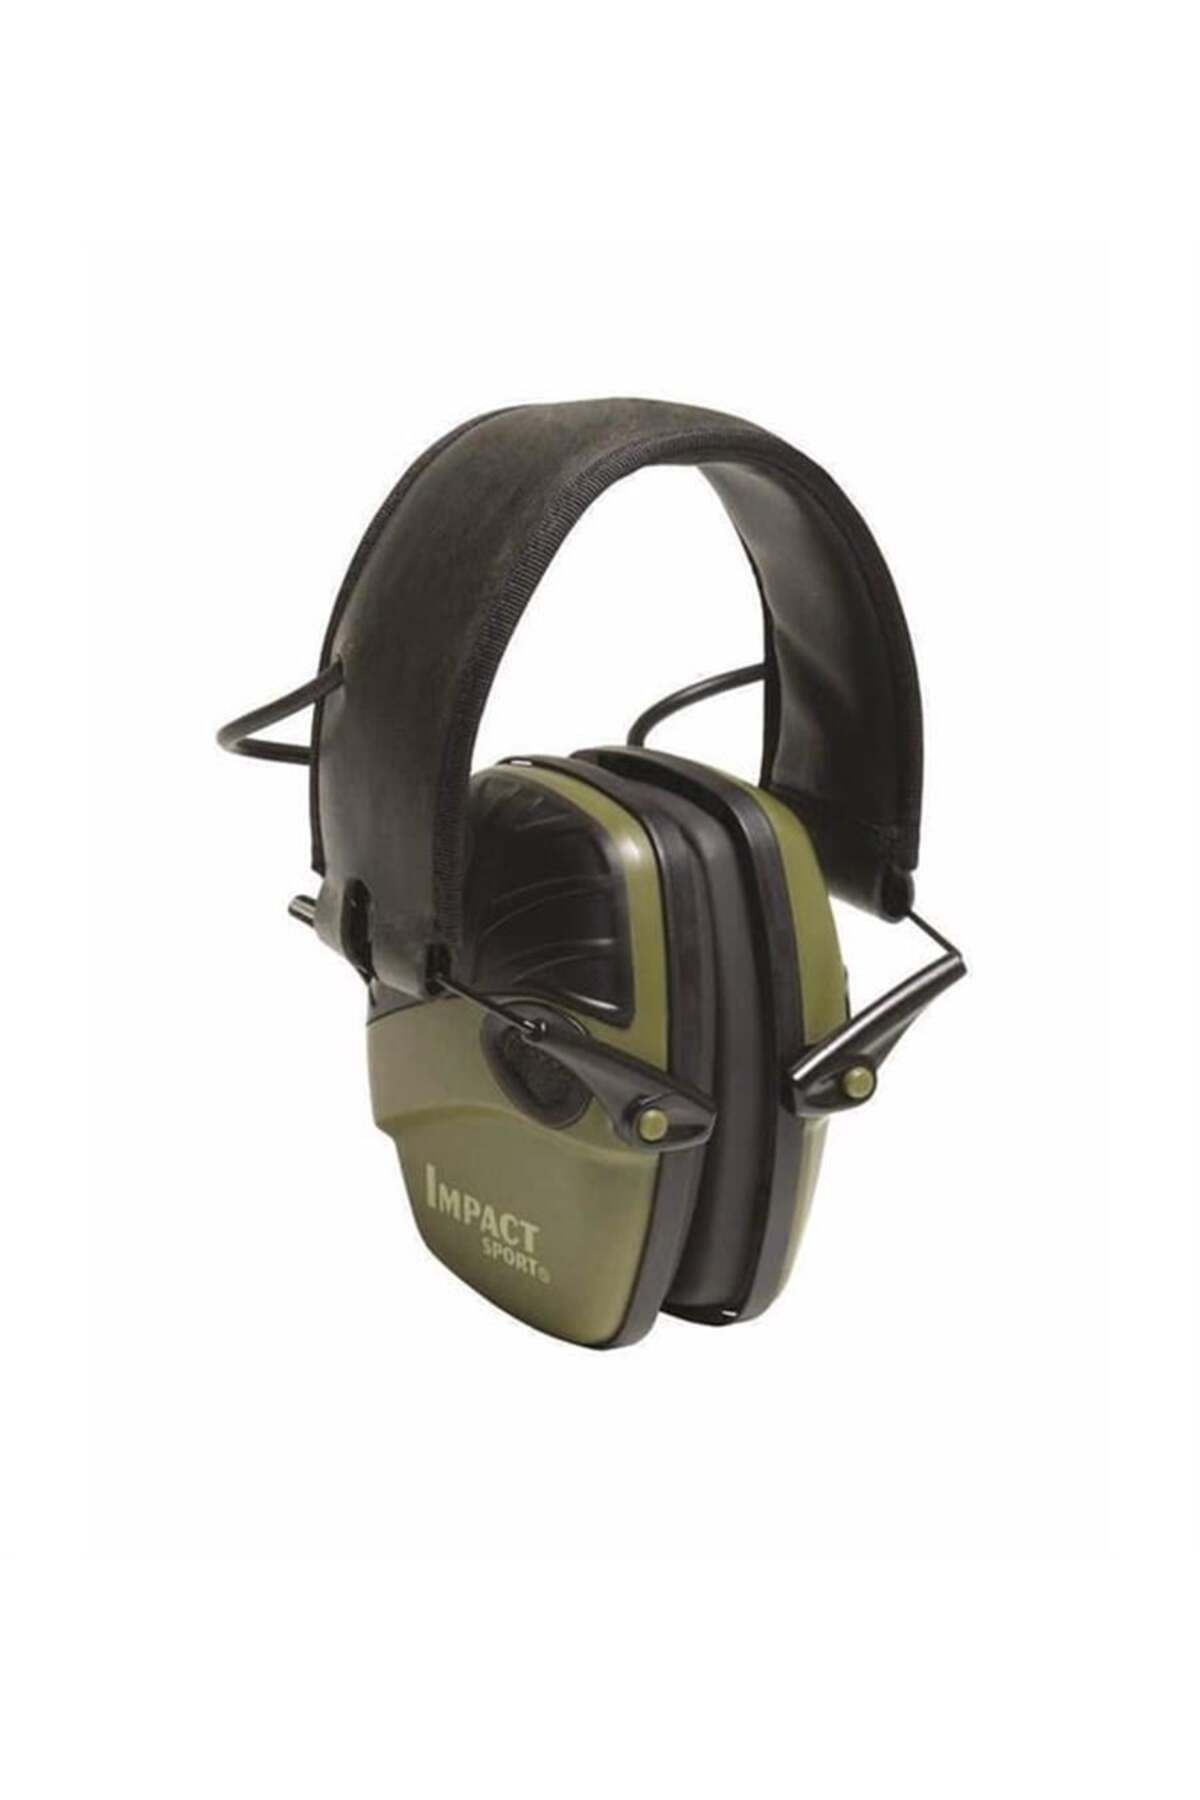 HONEYWELL Howard Leight By Impact Sport Sound